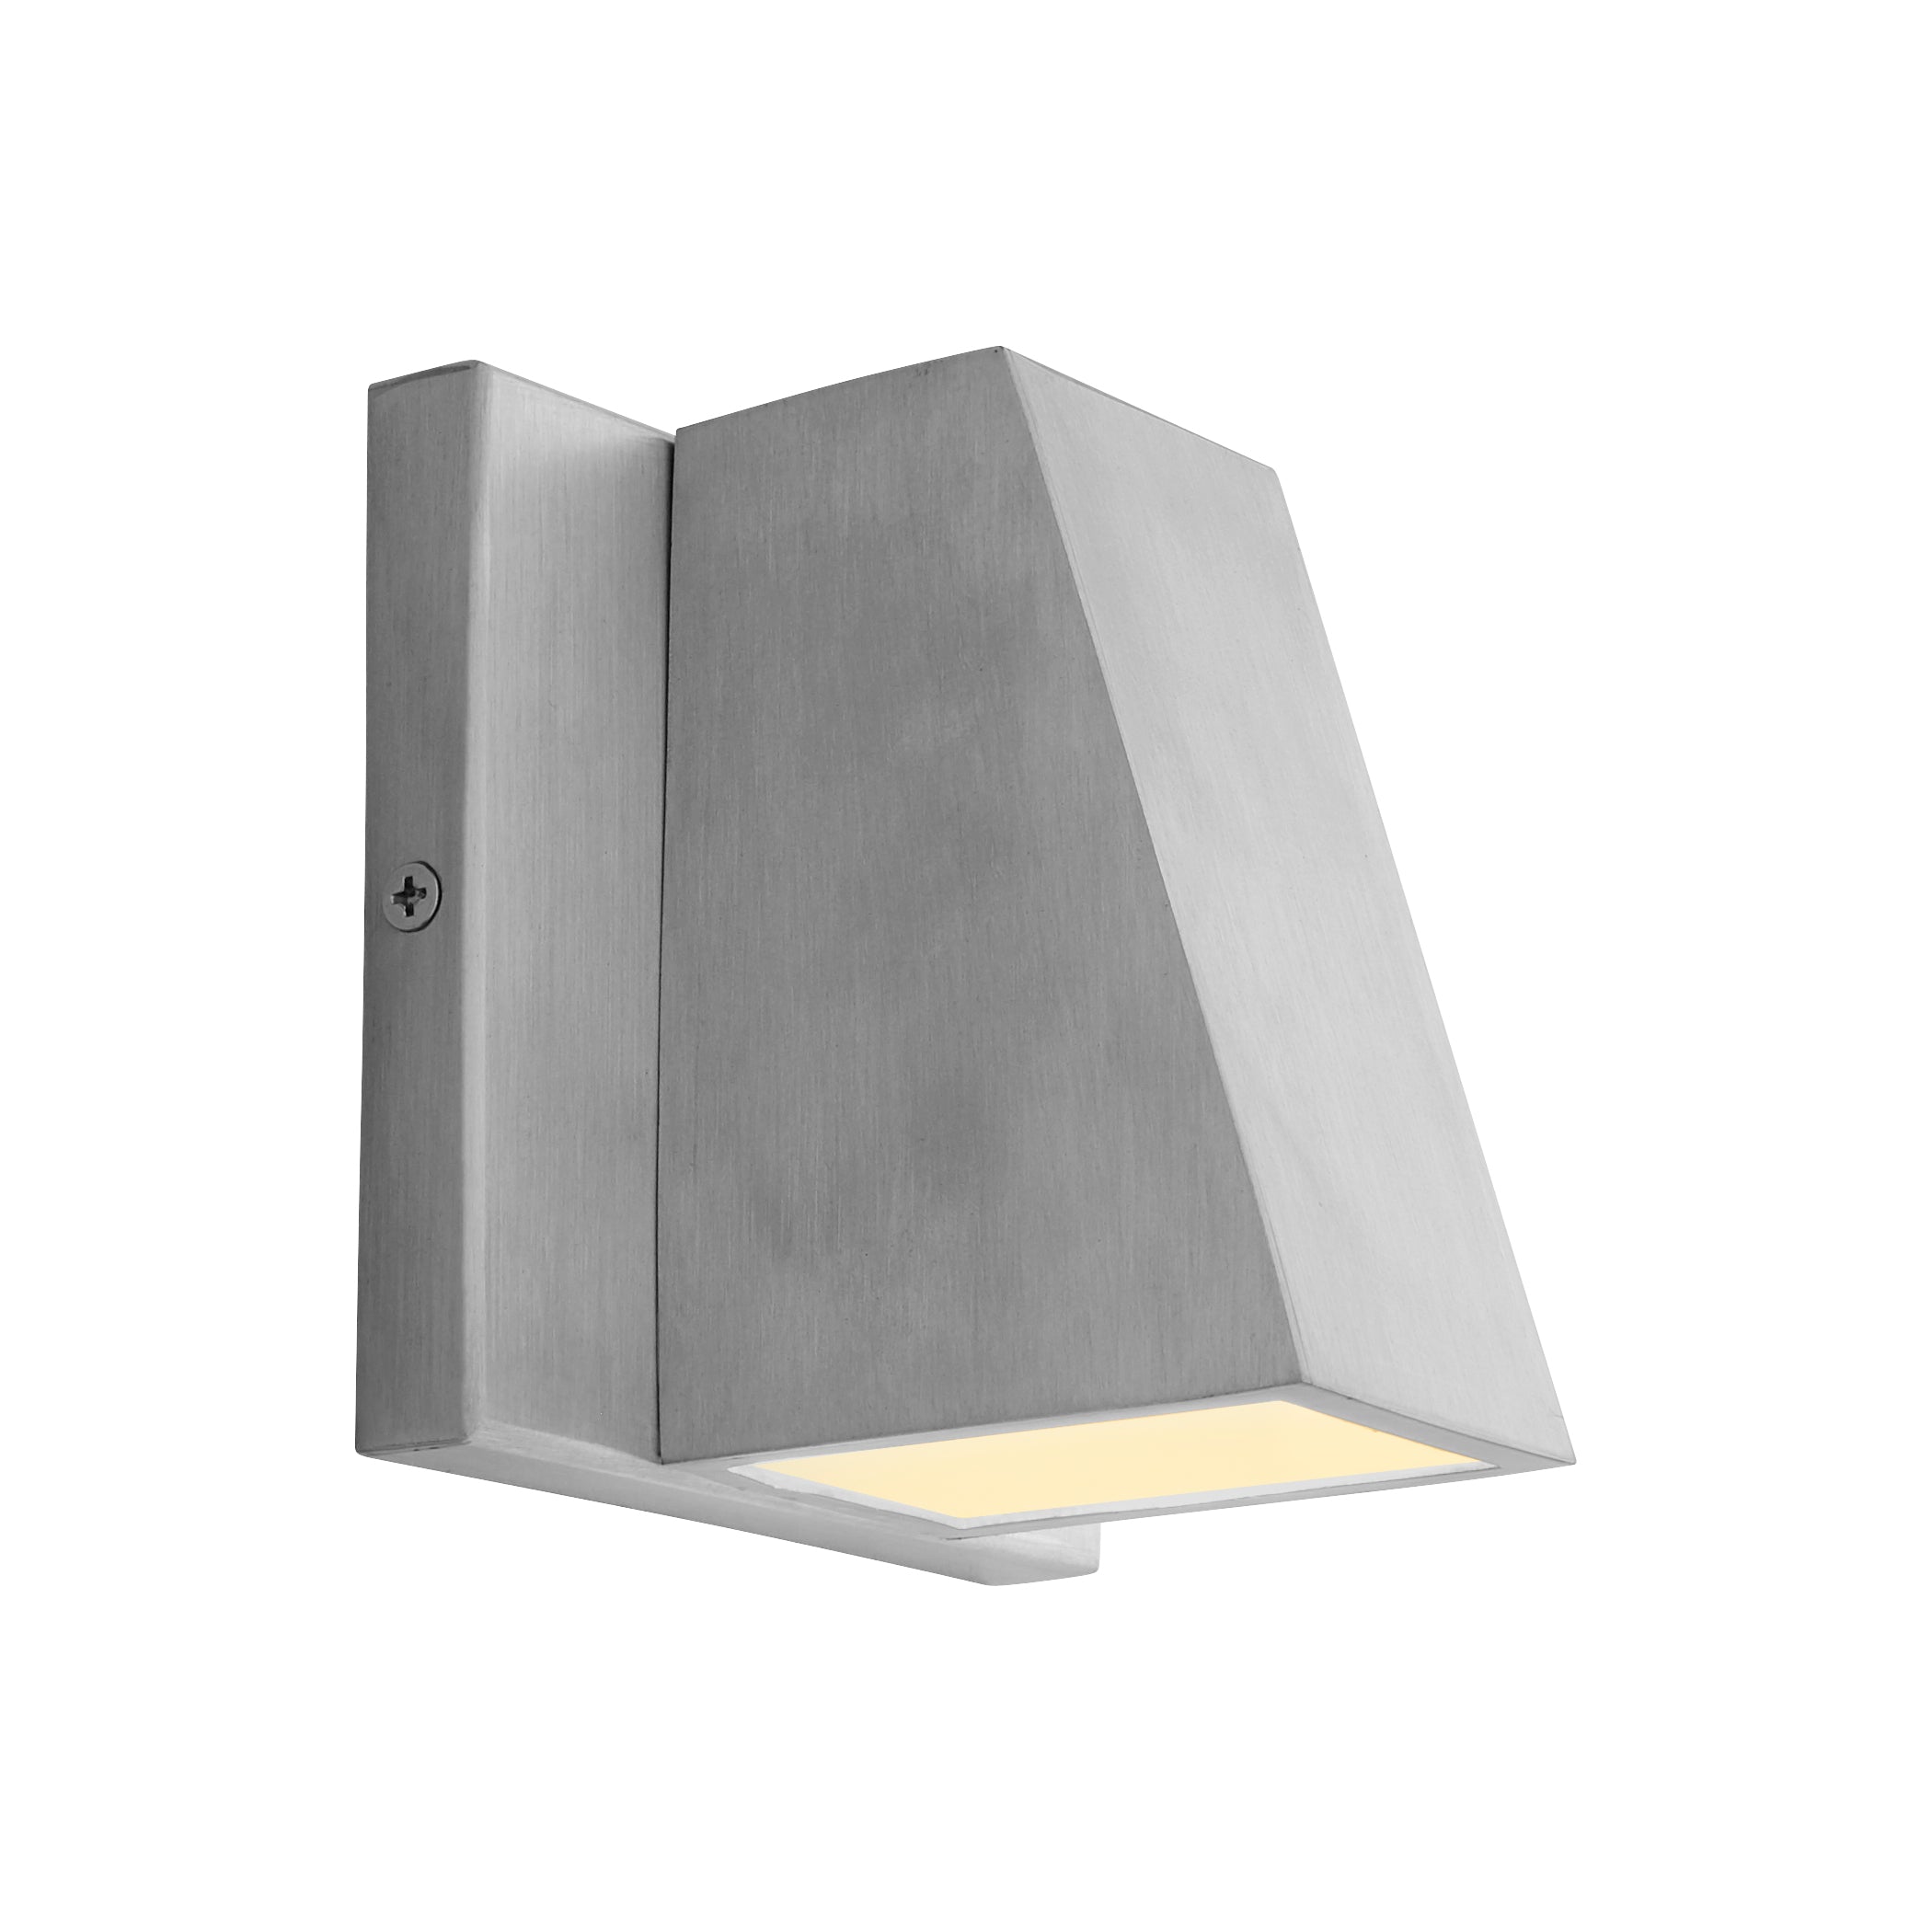 Oxygen TITAN 3-708-16 Outdoor LED Wall Sconce Light - Brushed Aluminum, White Frost Glass Diffuser